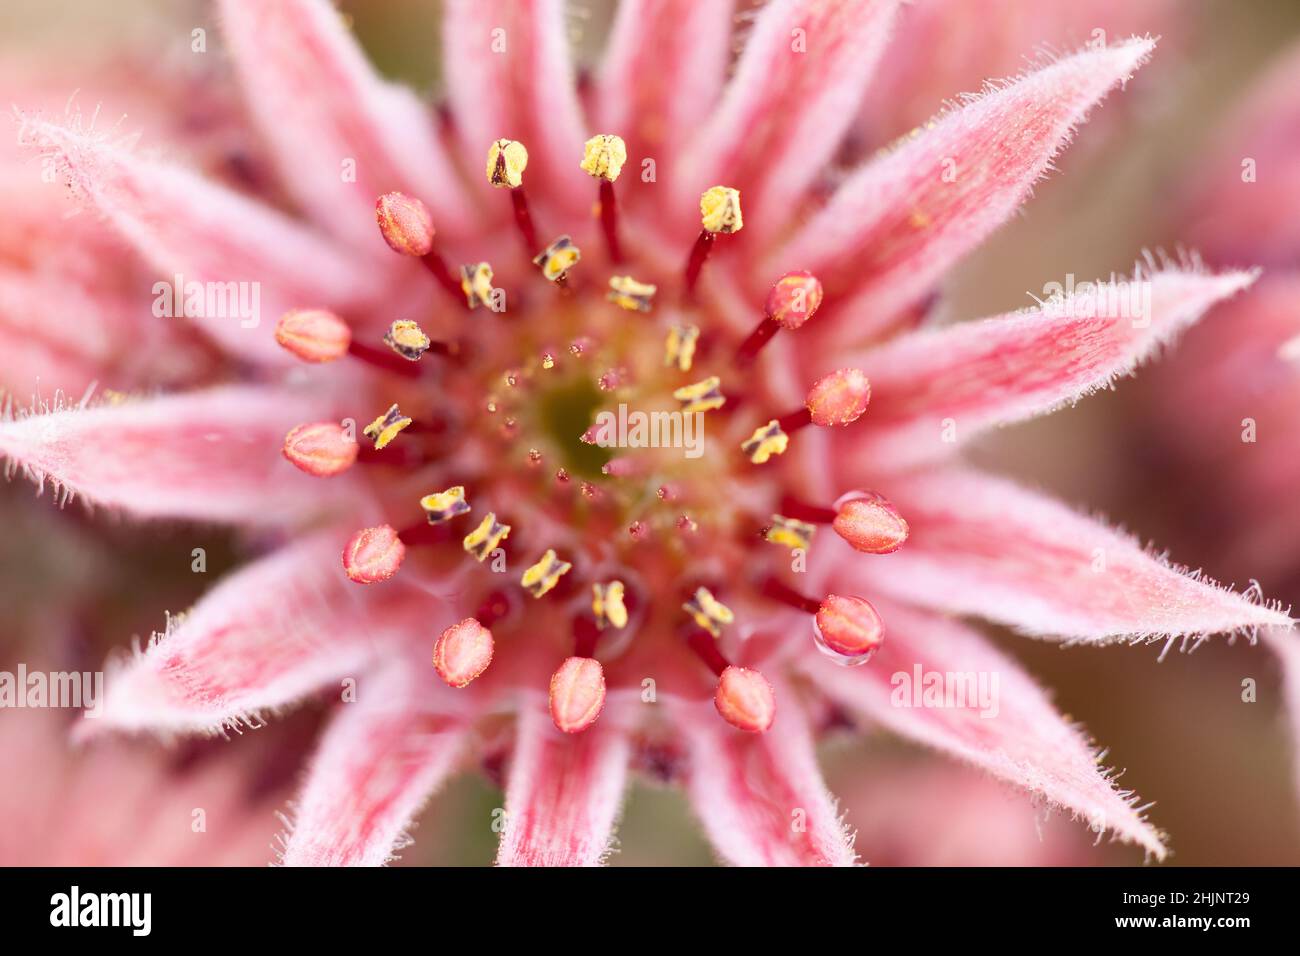 Stunning pink Sempervivum flower blooming close up. Garden flower head and petals and stamen in macro on a succulent plant Stock Photo